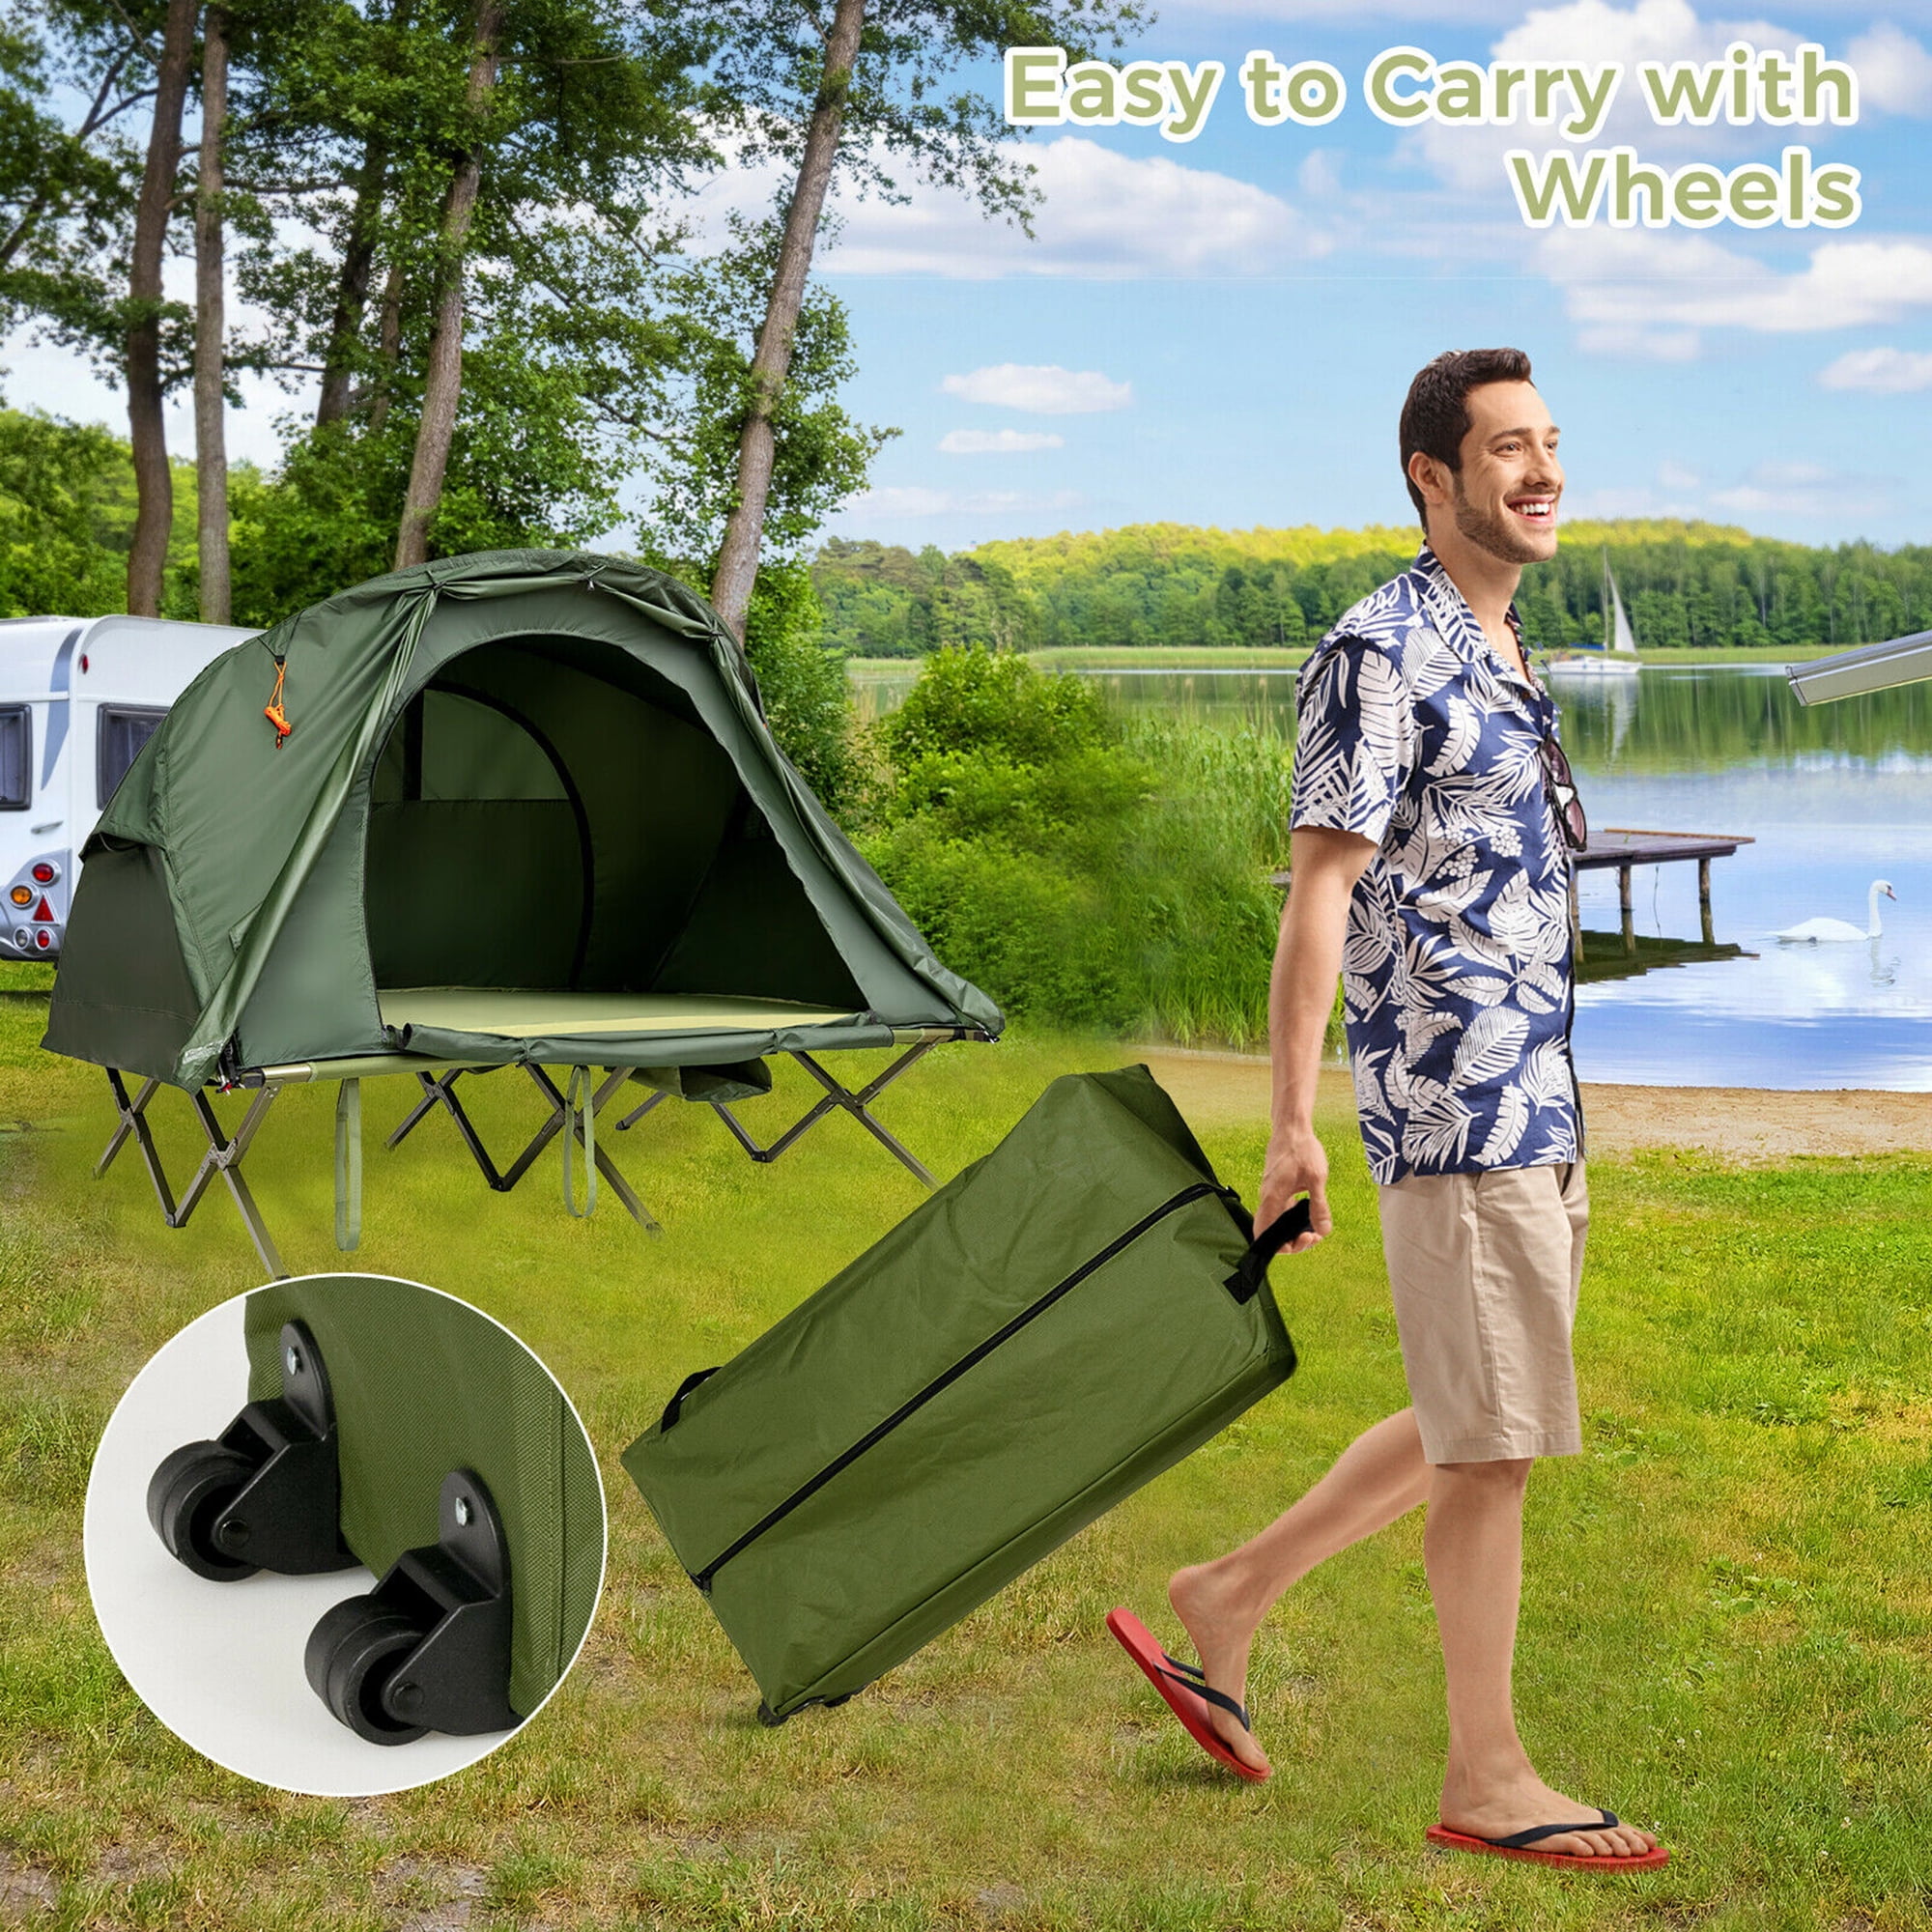 Angeles Home 2-Person PVC Outdoor Camping Tent with External Cover-Green, Large Roller Carrying Bag